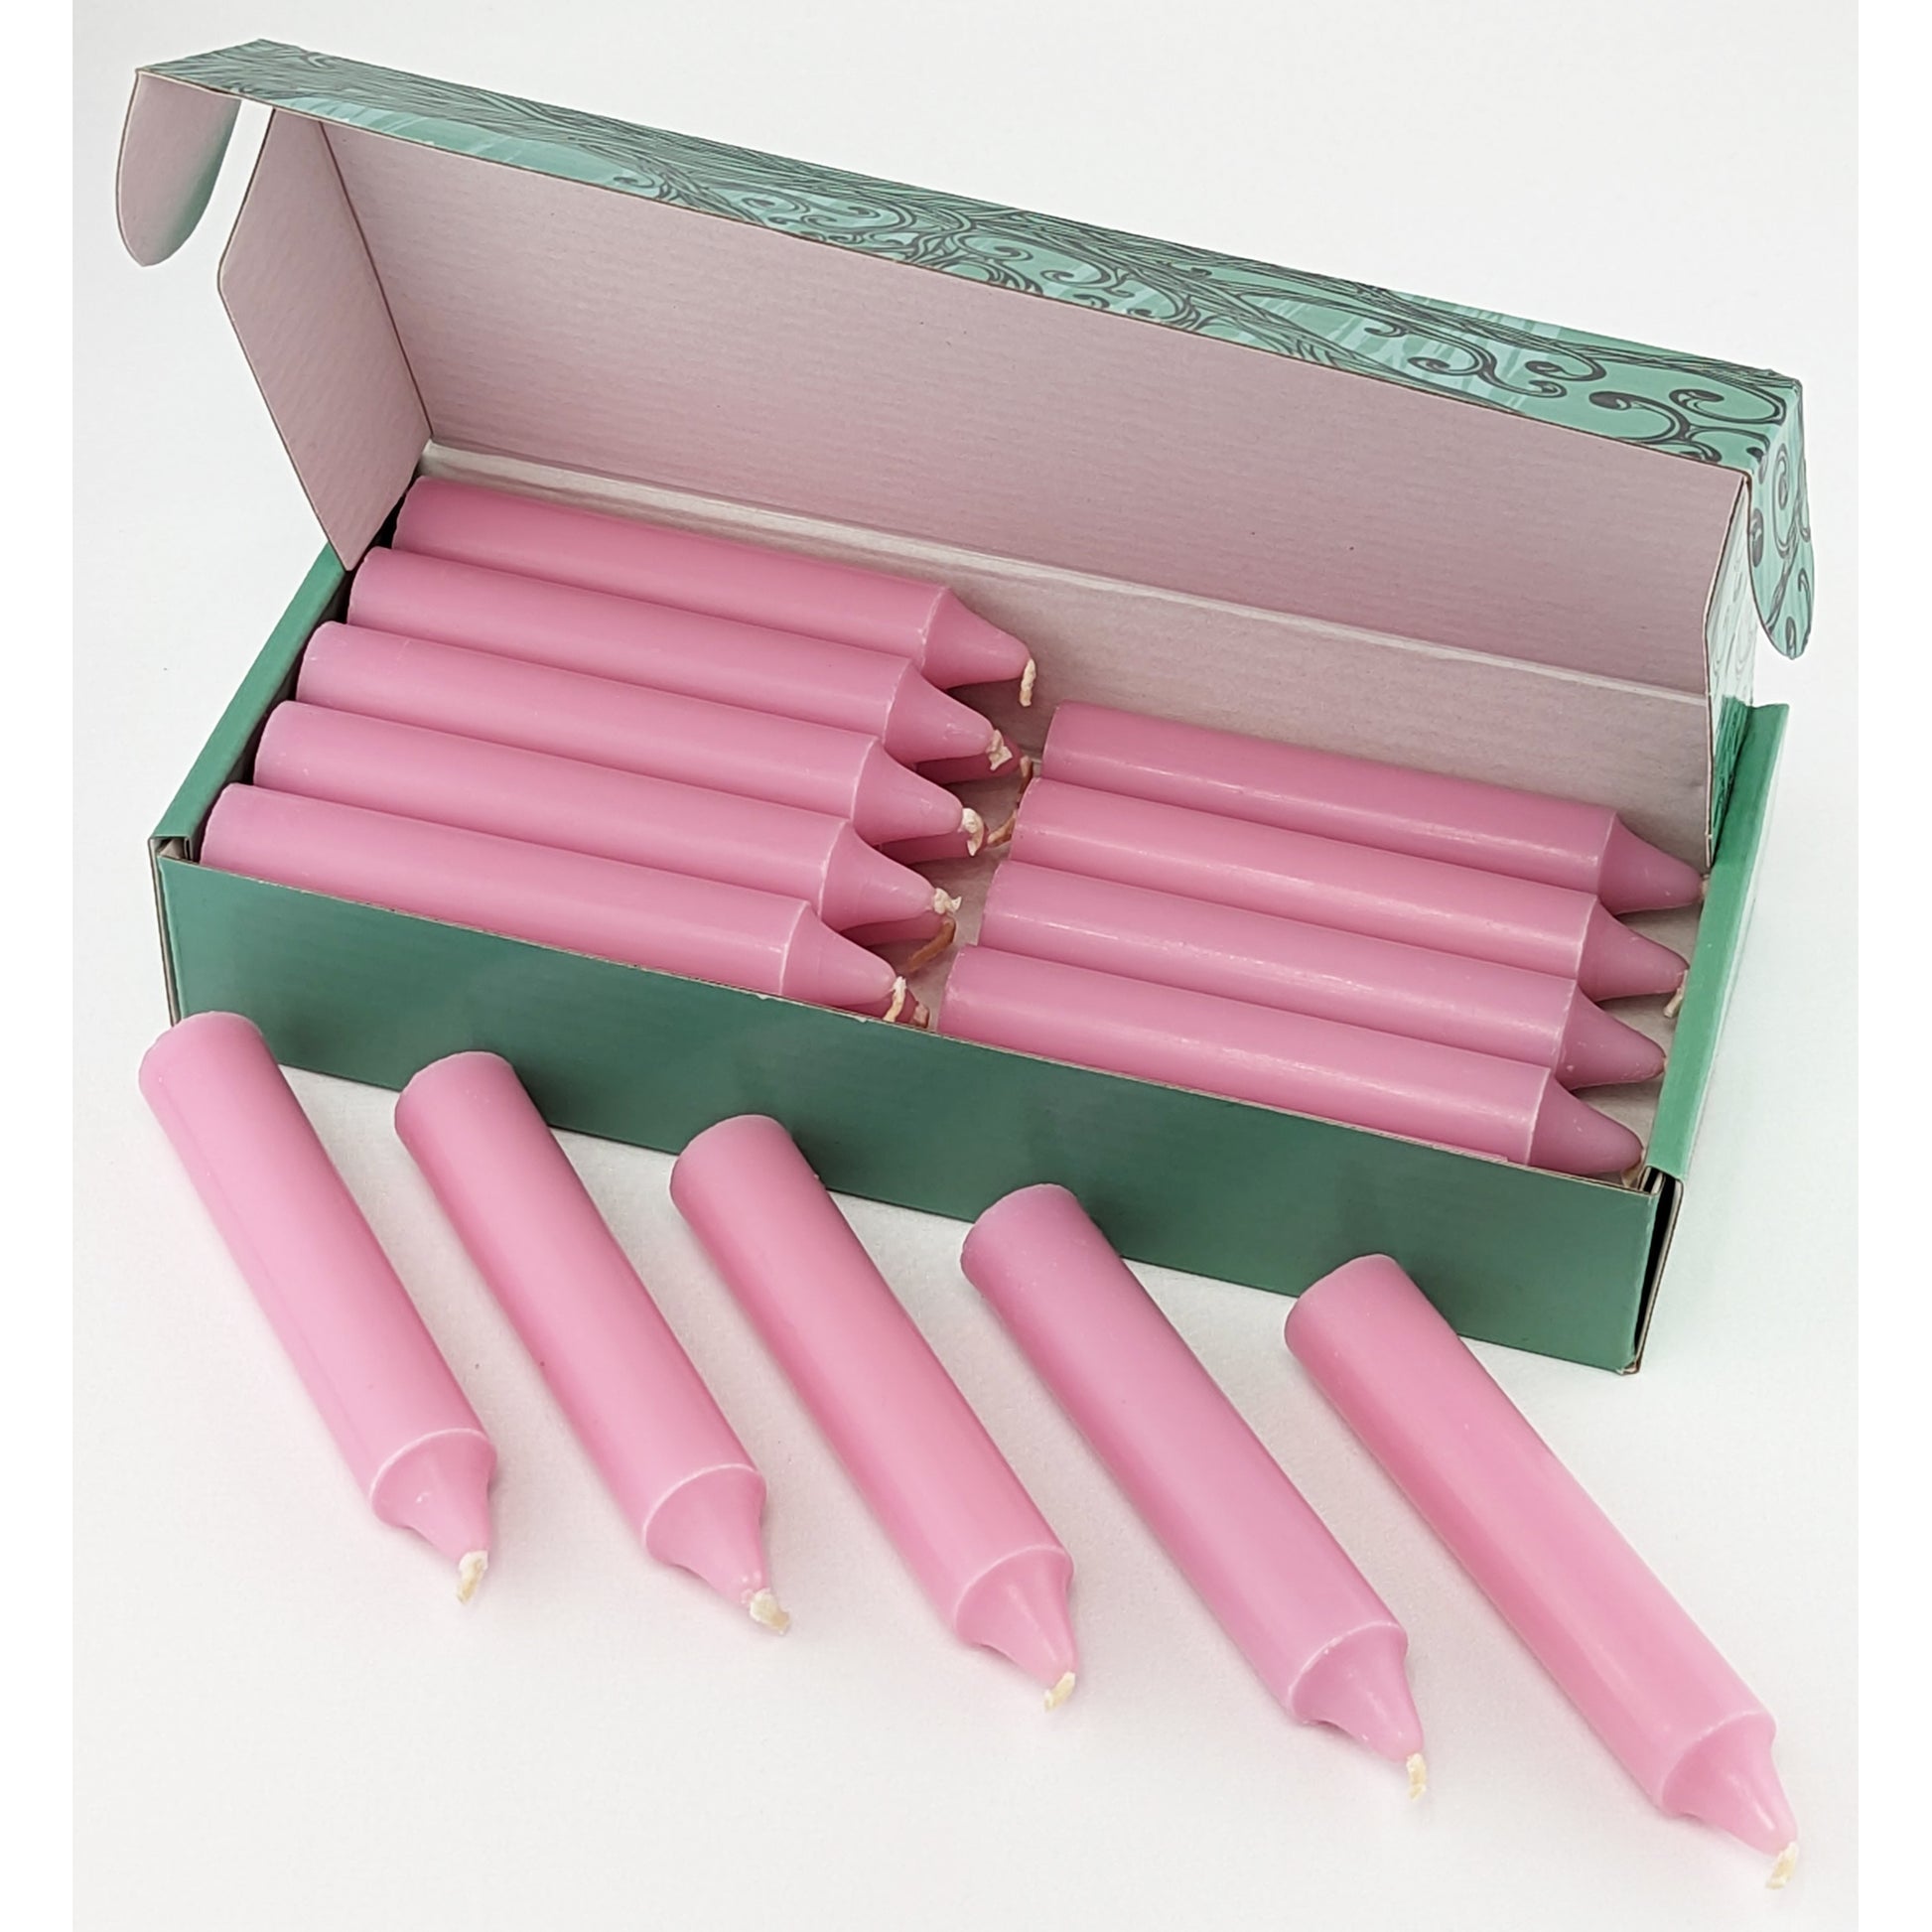 Close up image, pink candles with open display box.